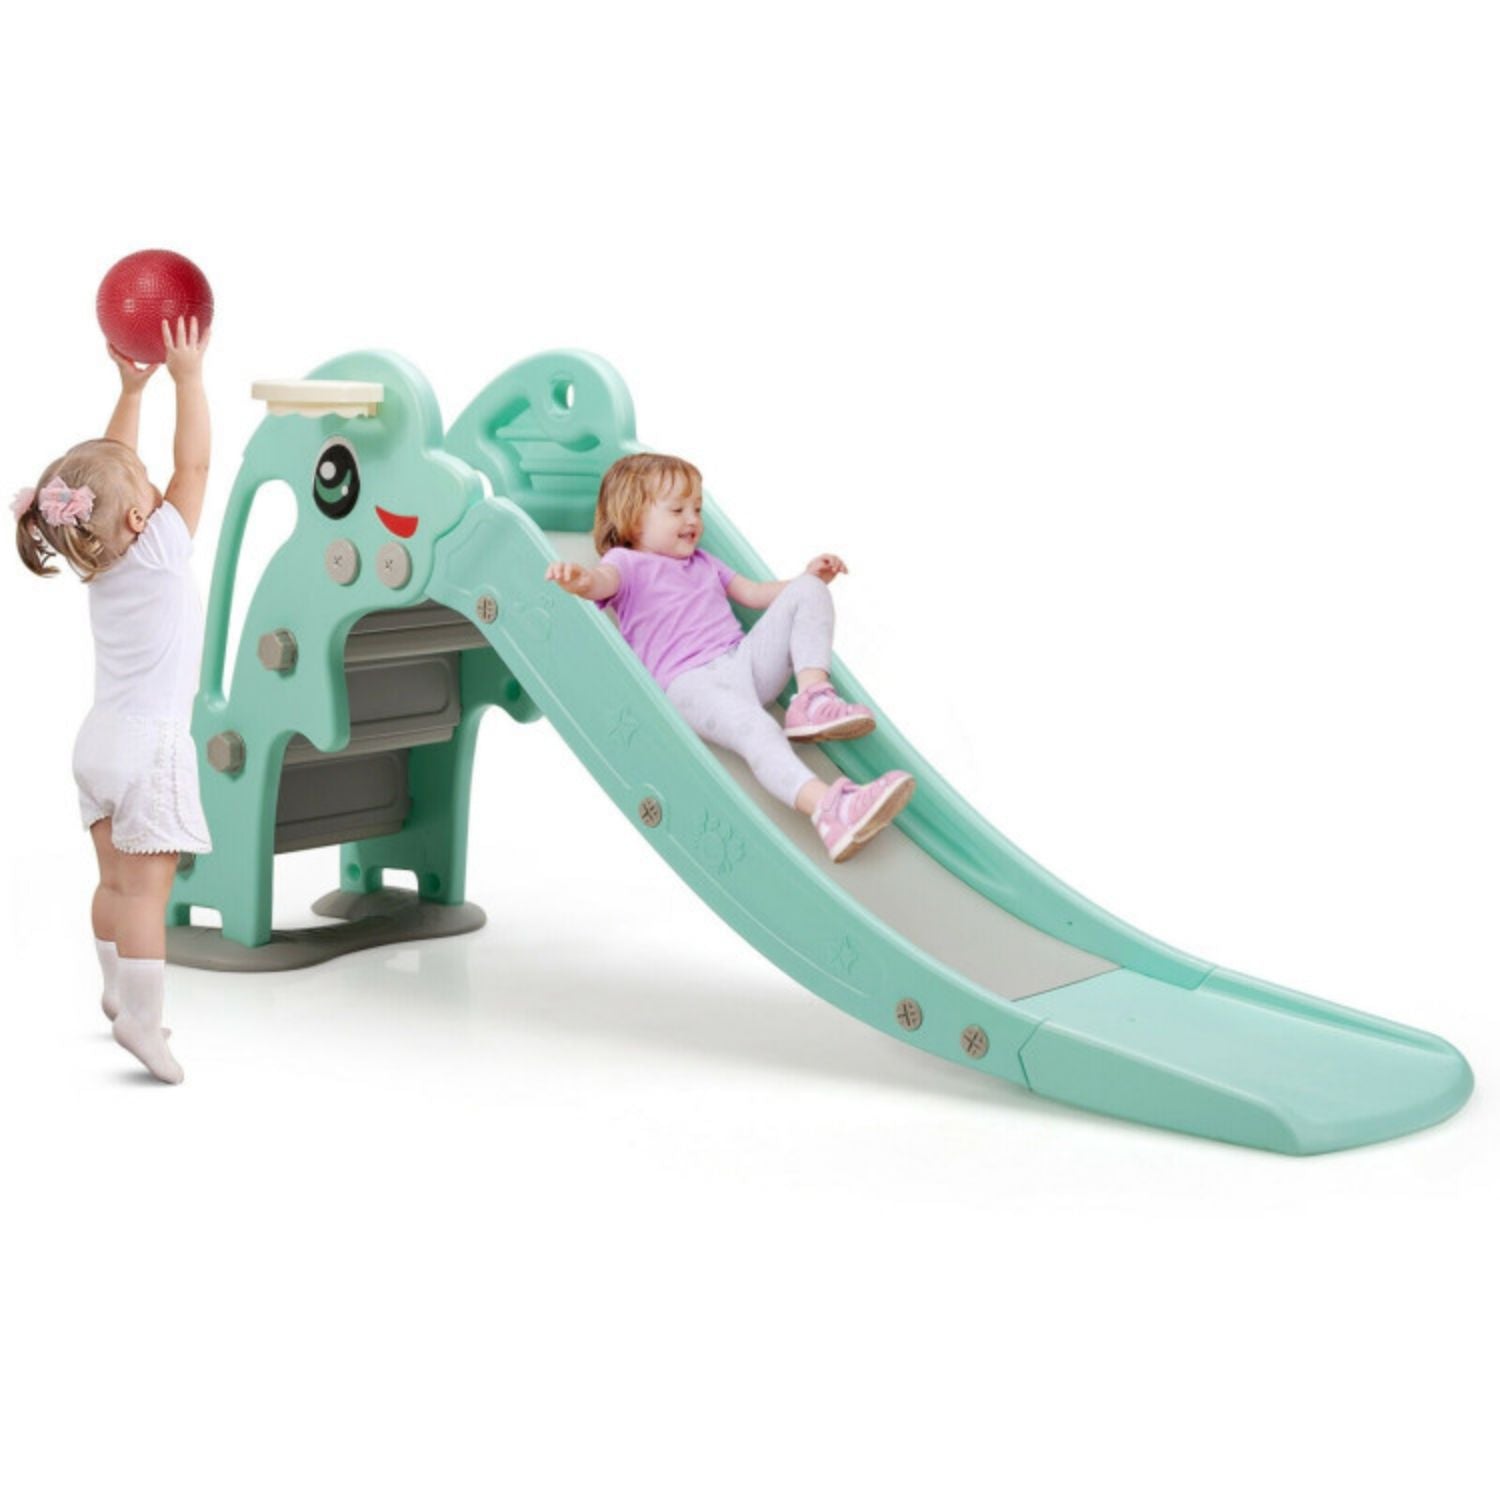 SUGIFT 3-in-1 Kids Climber Slide Play Set? with Basketball Hoop and Ball-Green